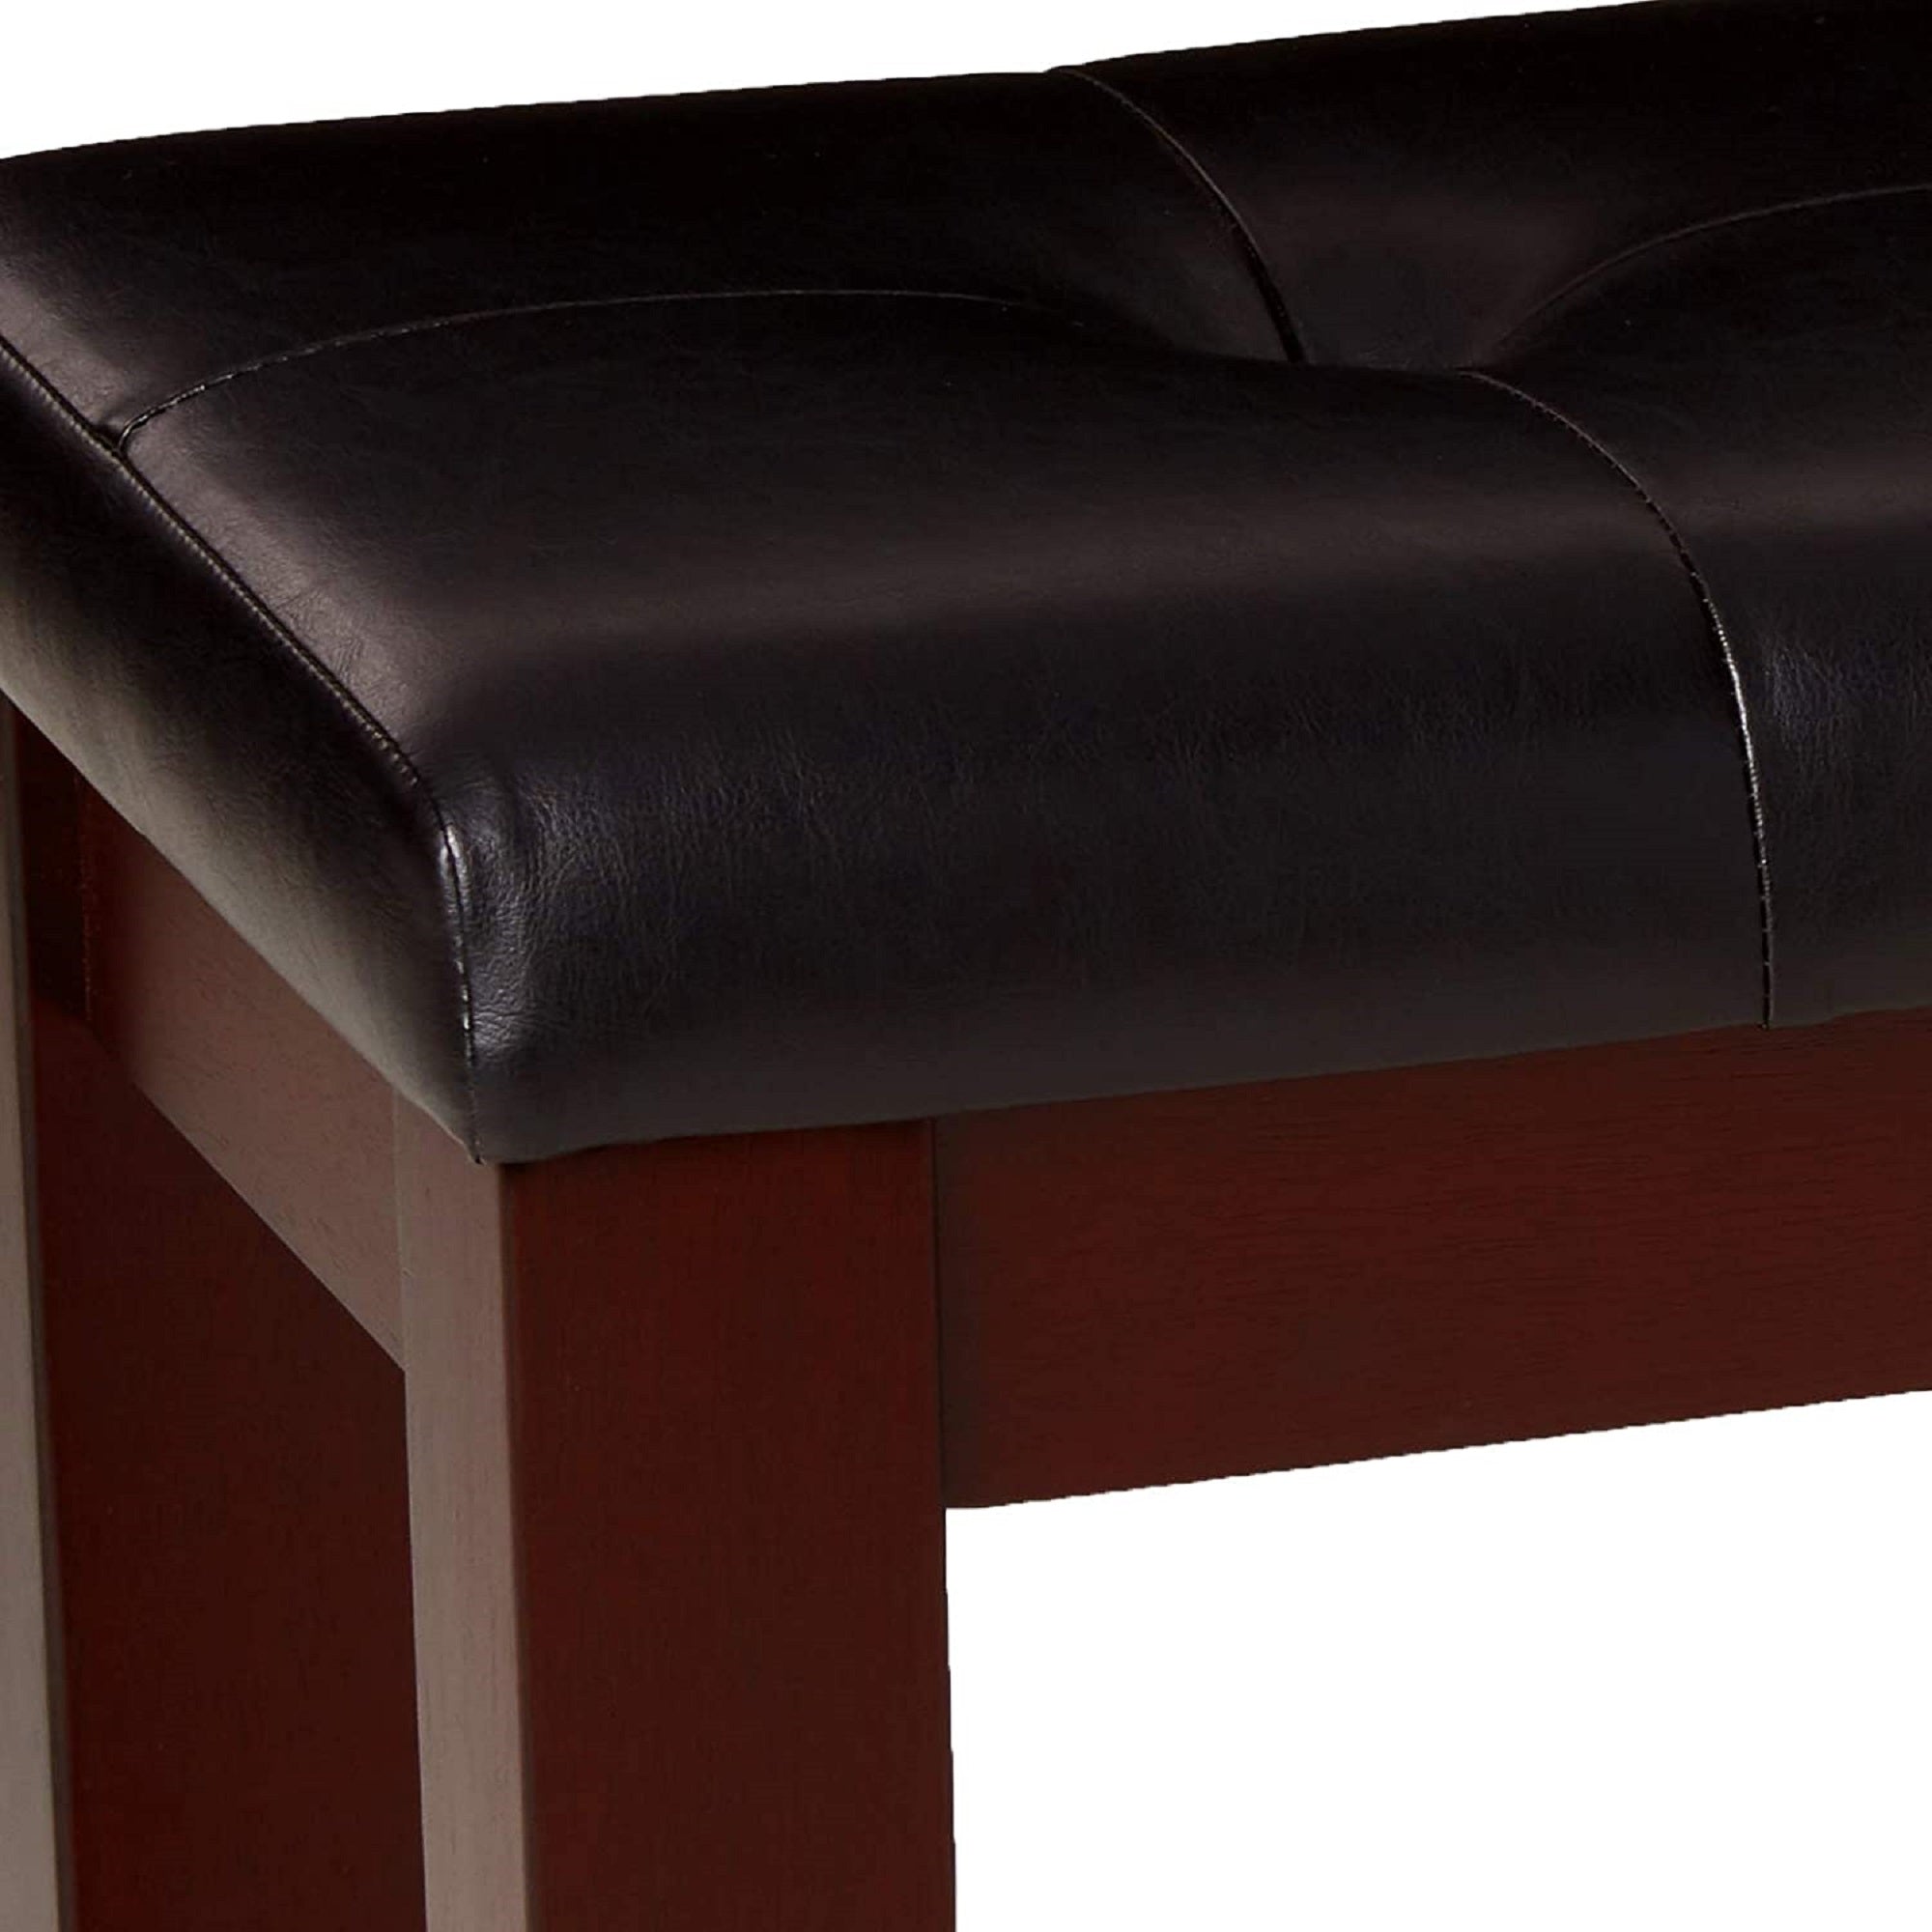 ZNTS 1Pc Modern Bench with Leather-Look Seat Tufted Upholstery Tapered Wood Legs Bedroom Living Room B011119817